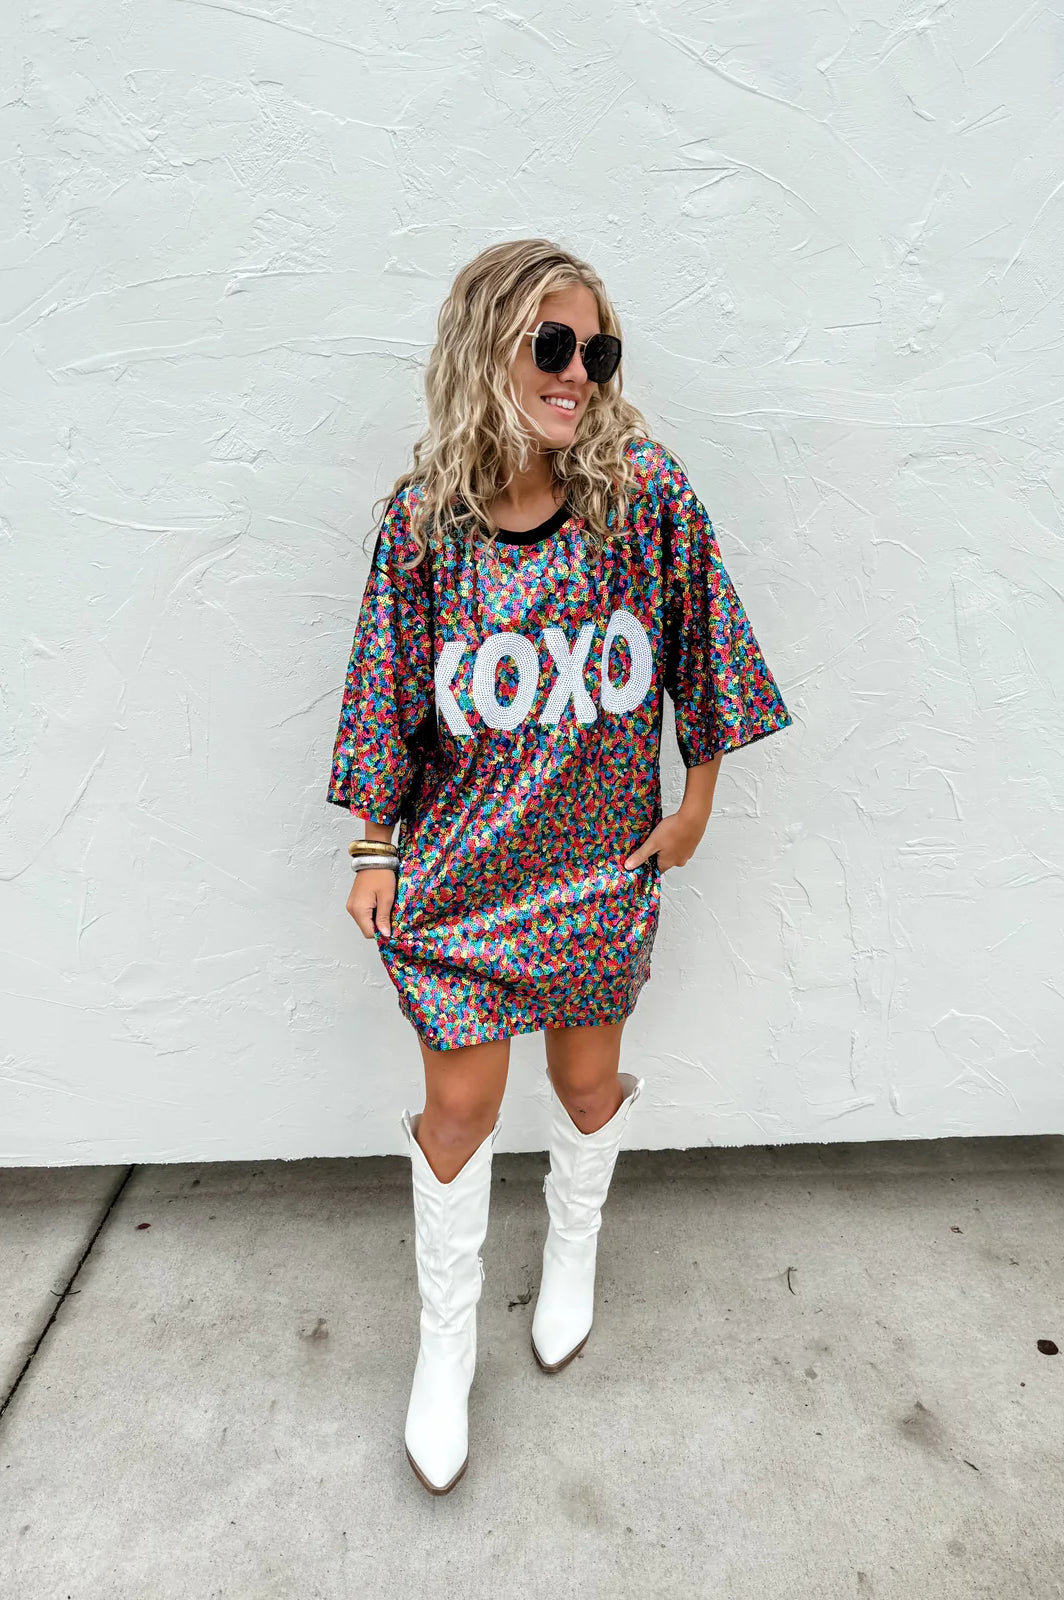 BLAKELY | XOXO Sequin Top Casual Chic Boutique